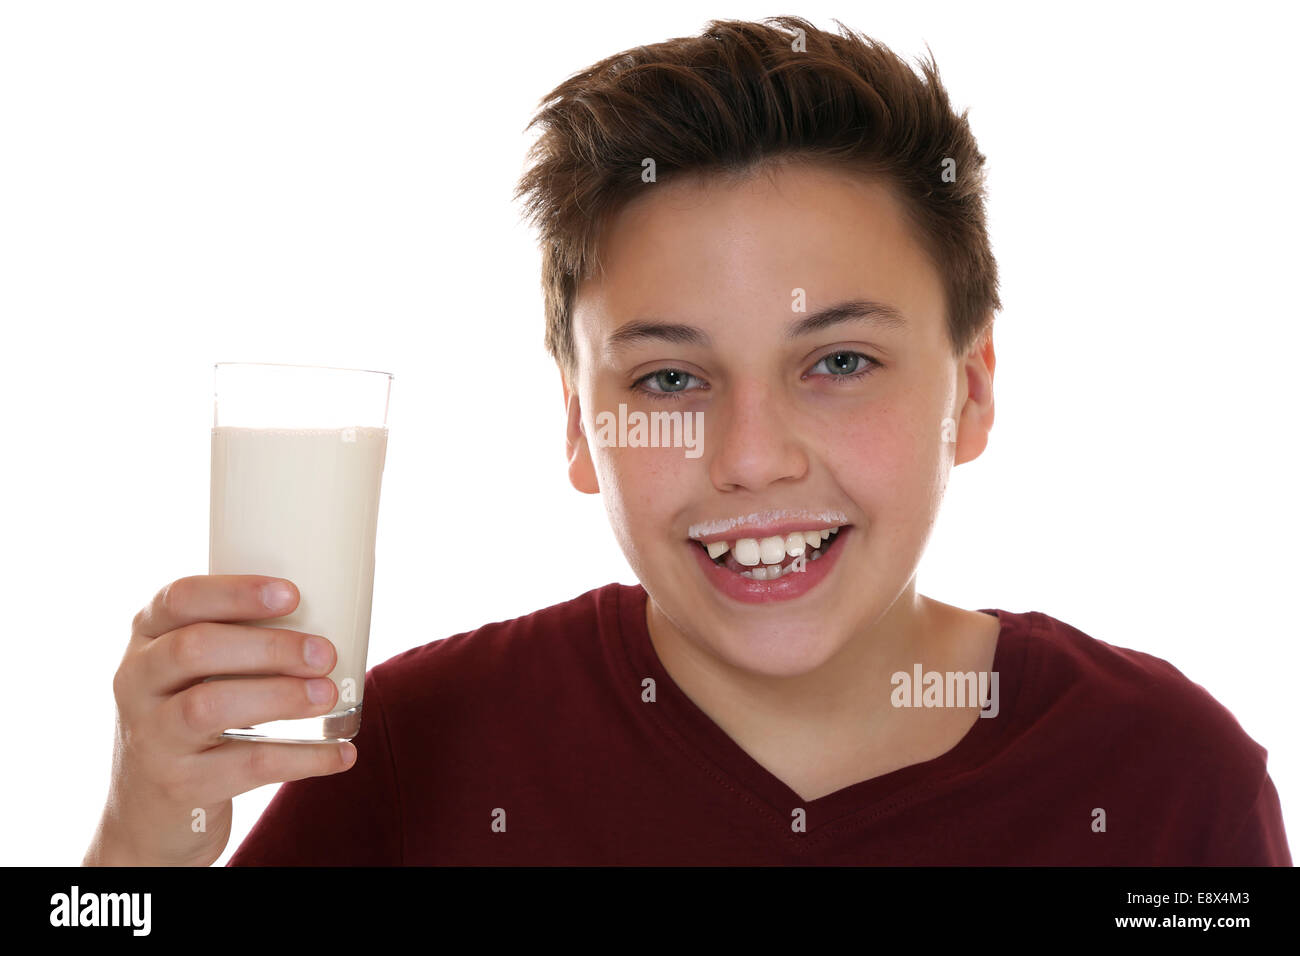 Healthy eating child drinking milk with moustache, isolated on a white background Stock Photo